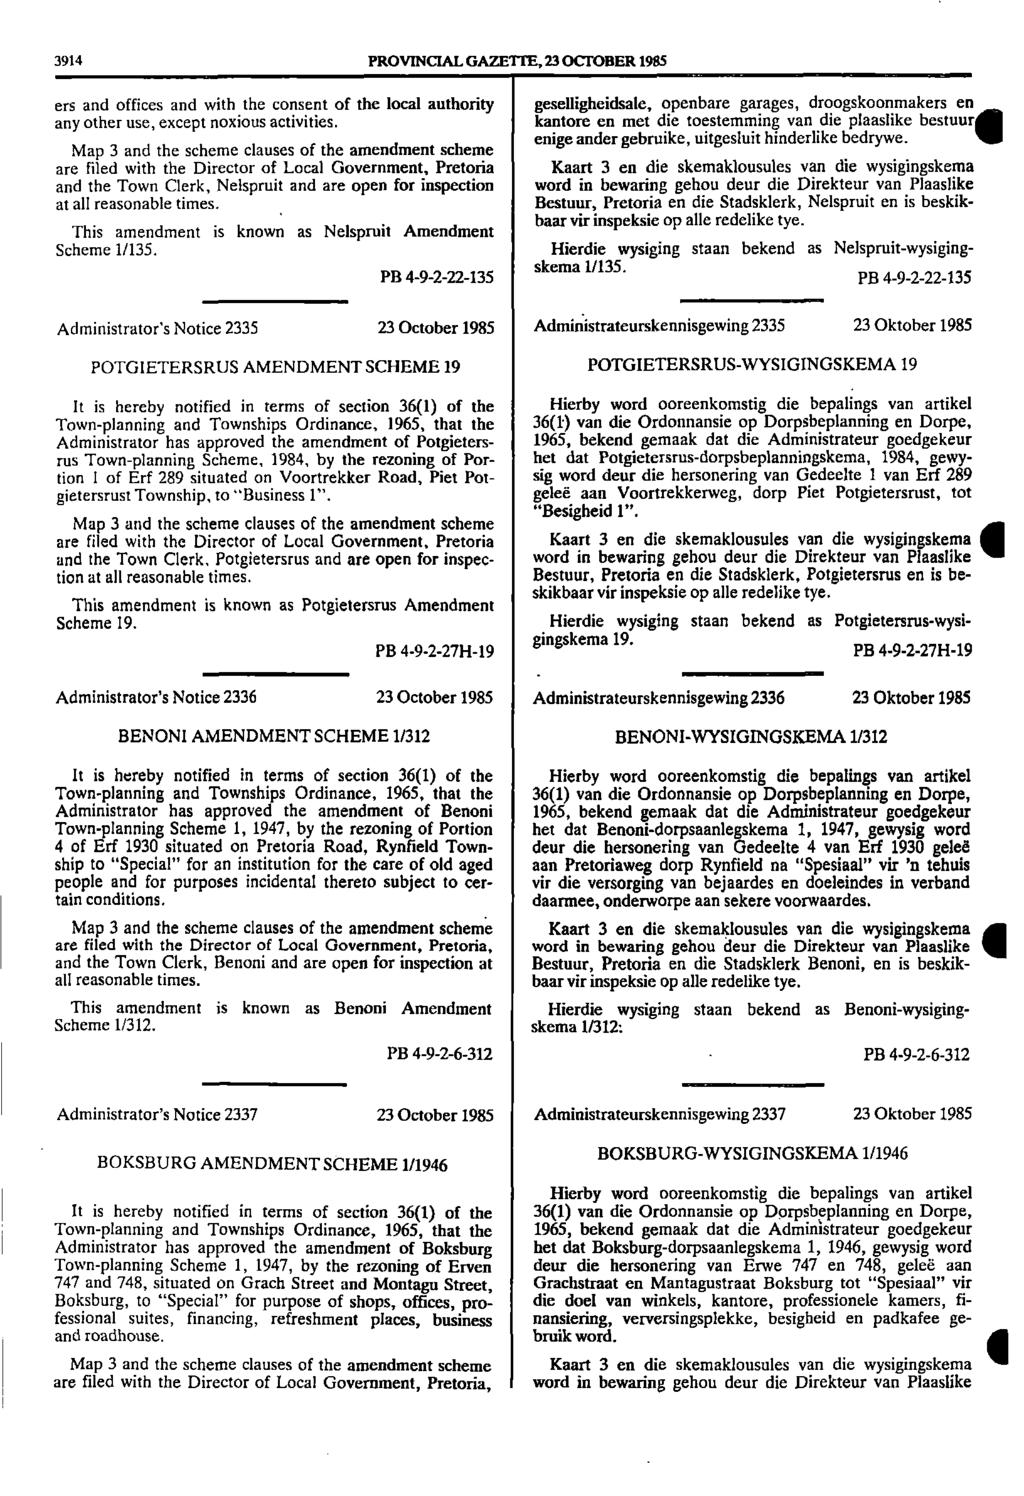 3914 PROVINCIAL GAZETTE, 23 OCTOBER 1985 ers and offices and with the consent of the local authority geselligheidsale, openbare garages, droogskoonmakers en any other use, except noxious activities.